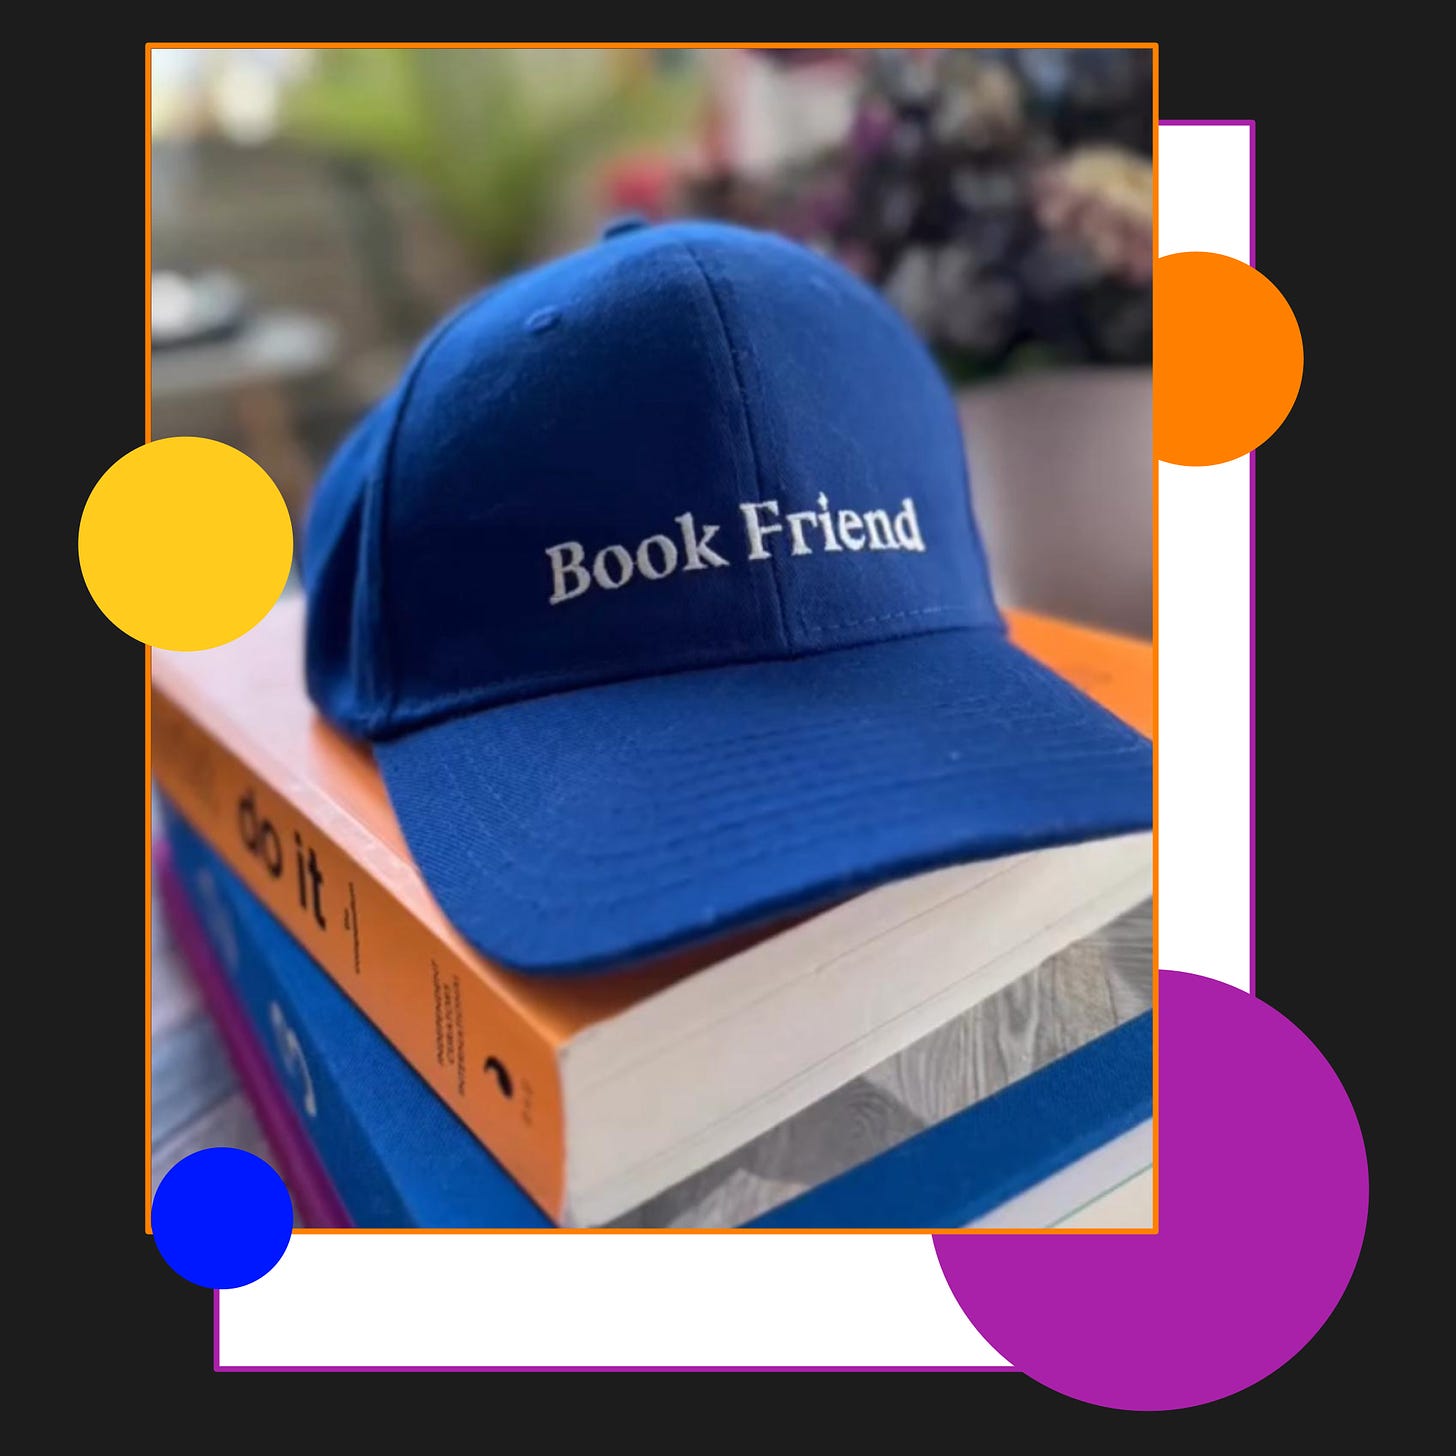 A blue baseball cap reading “Book Friend” on top of a pile of books.